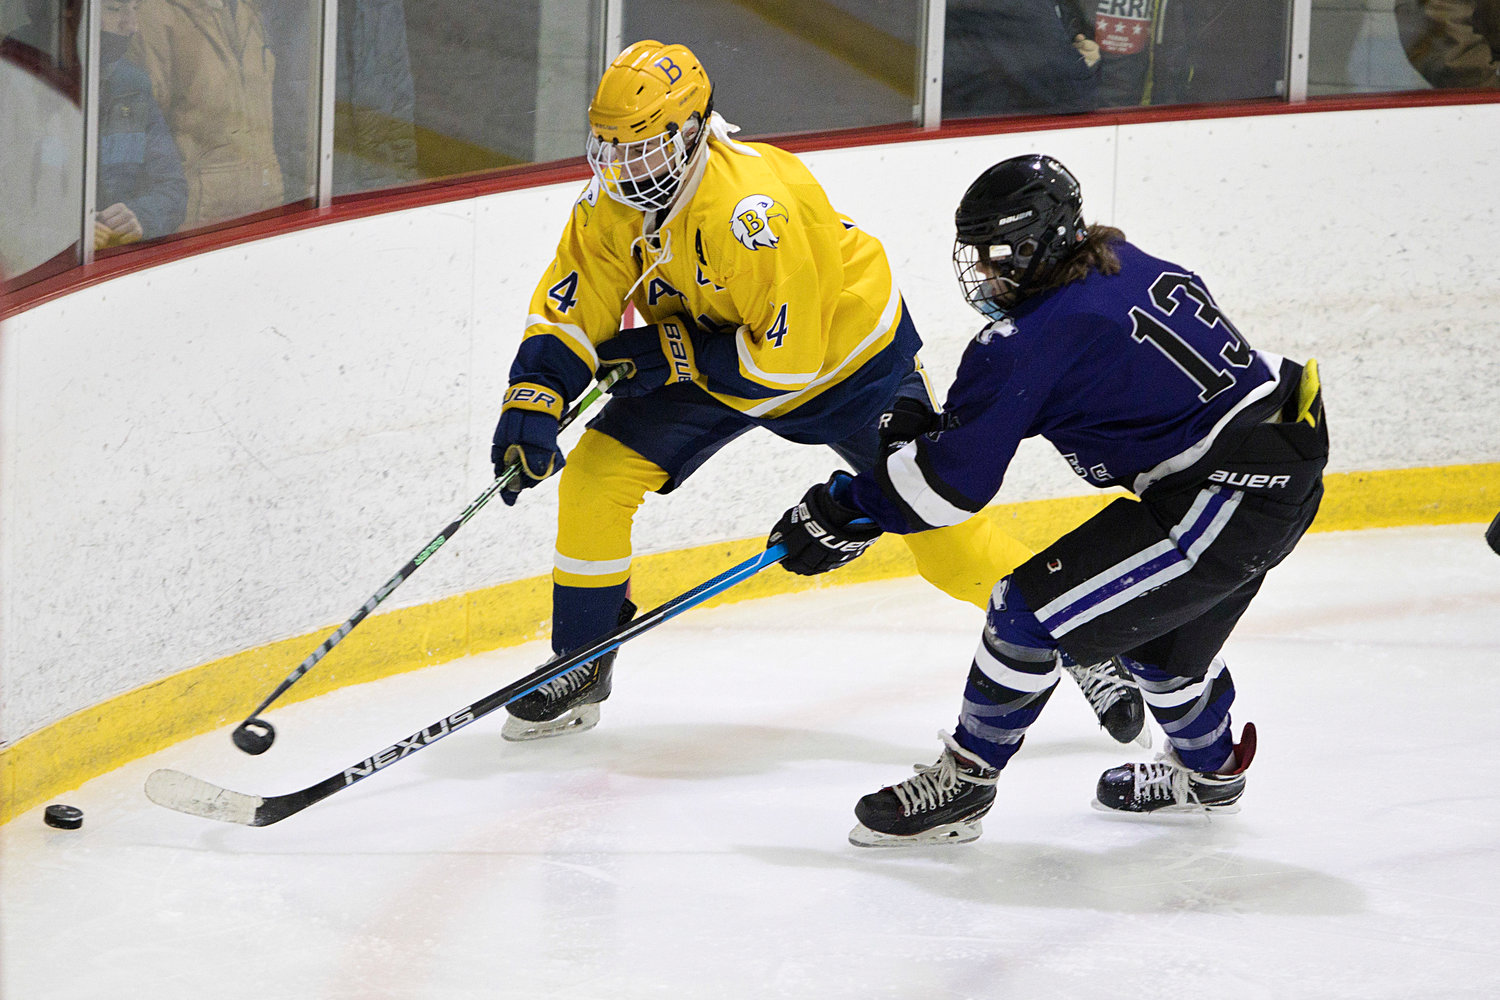 Barrington’s Brenen Gazeryan is pressured by a Mount hope opponent while controlling the puck along the boards.